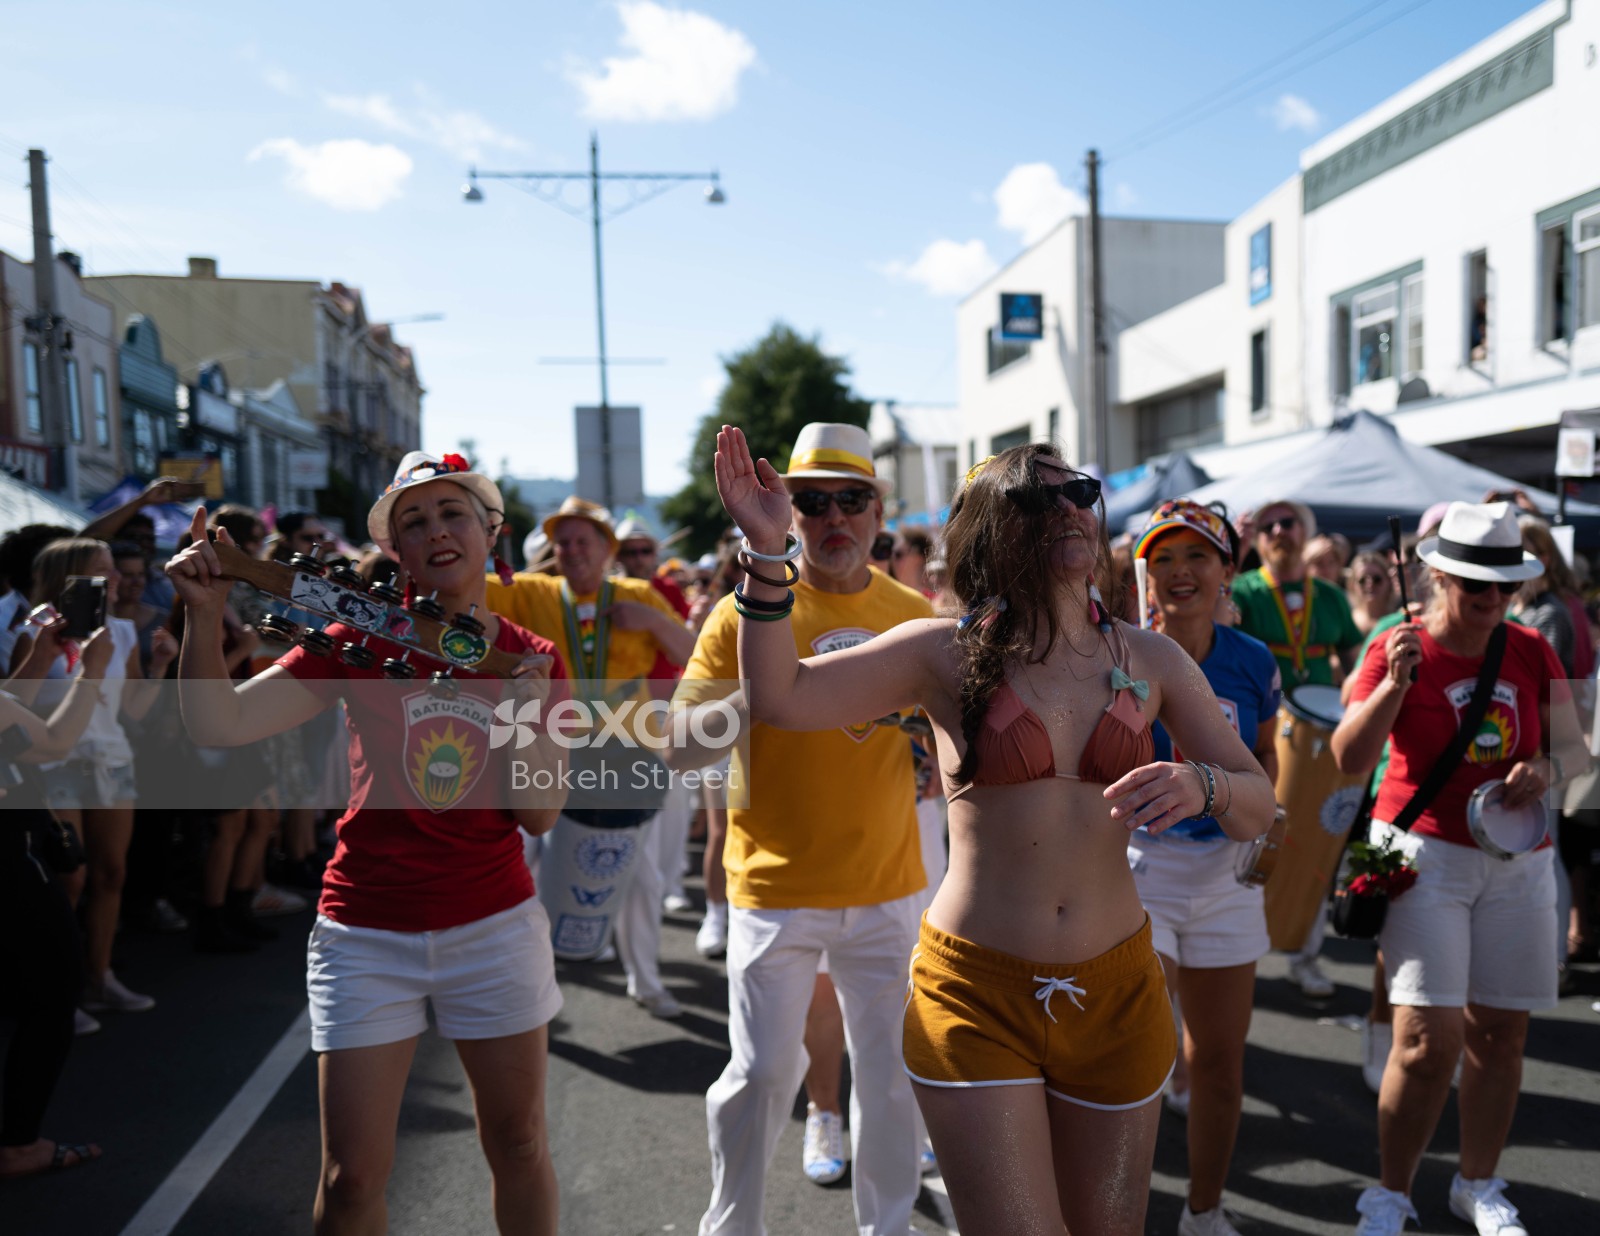 Group of people parading at Newtown Festival 2020